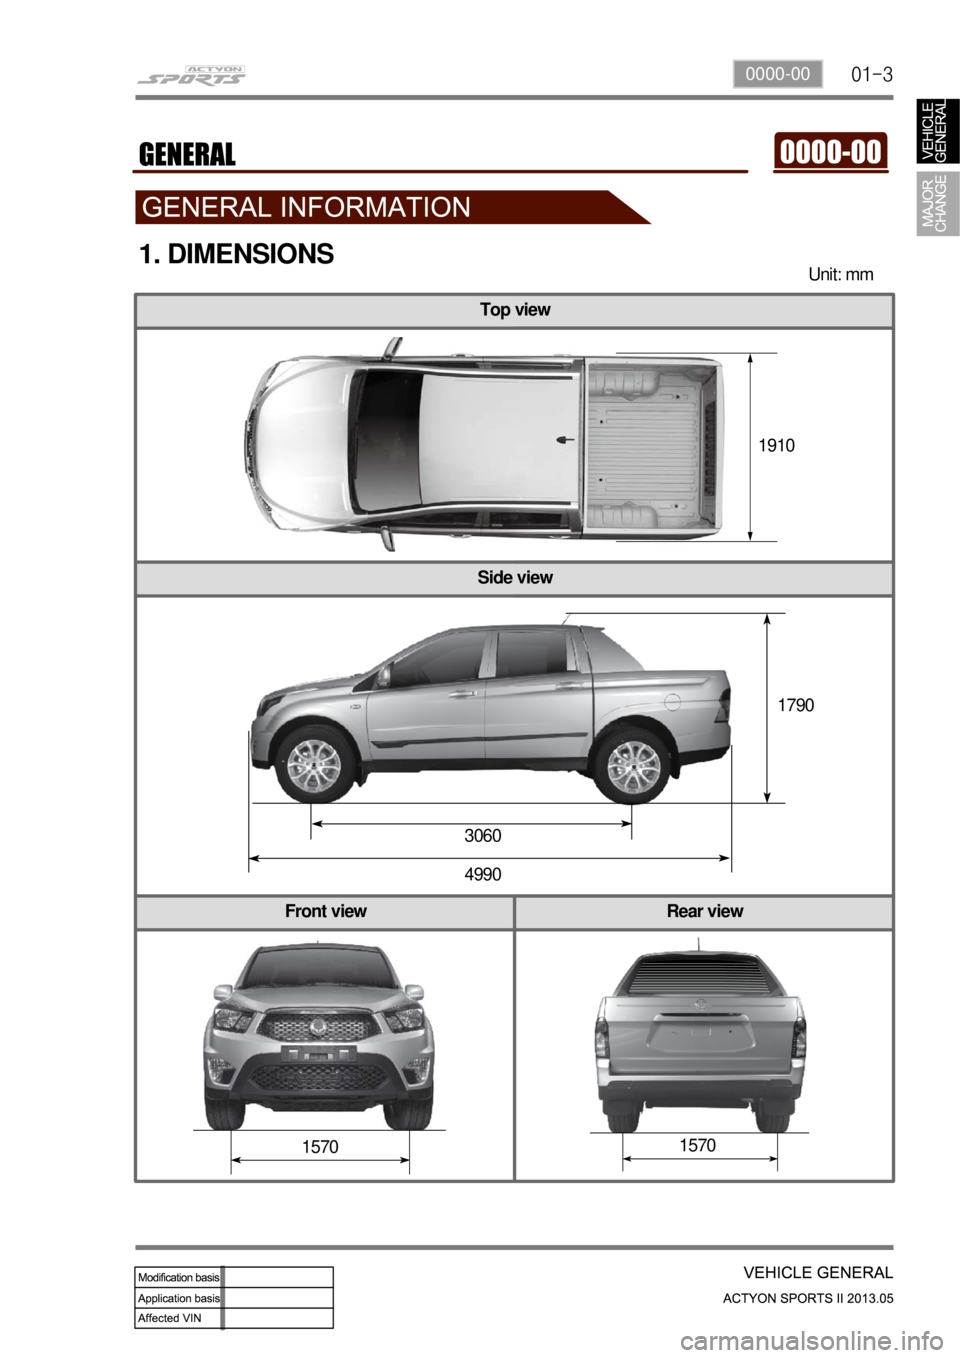 SSANGYONG NEW ACTYON SPORTS 2013  Service Manual 01-30000-00
Top view
Side view
Front view Rear view
1. DIMENSIONS
Unit: mm
1910 
1790 
3060 
4990
1570 
1570  